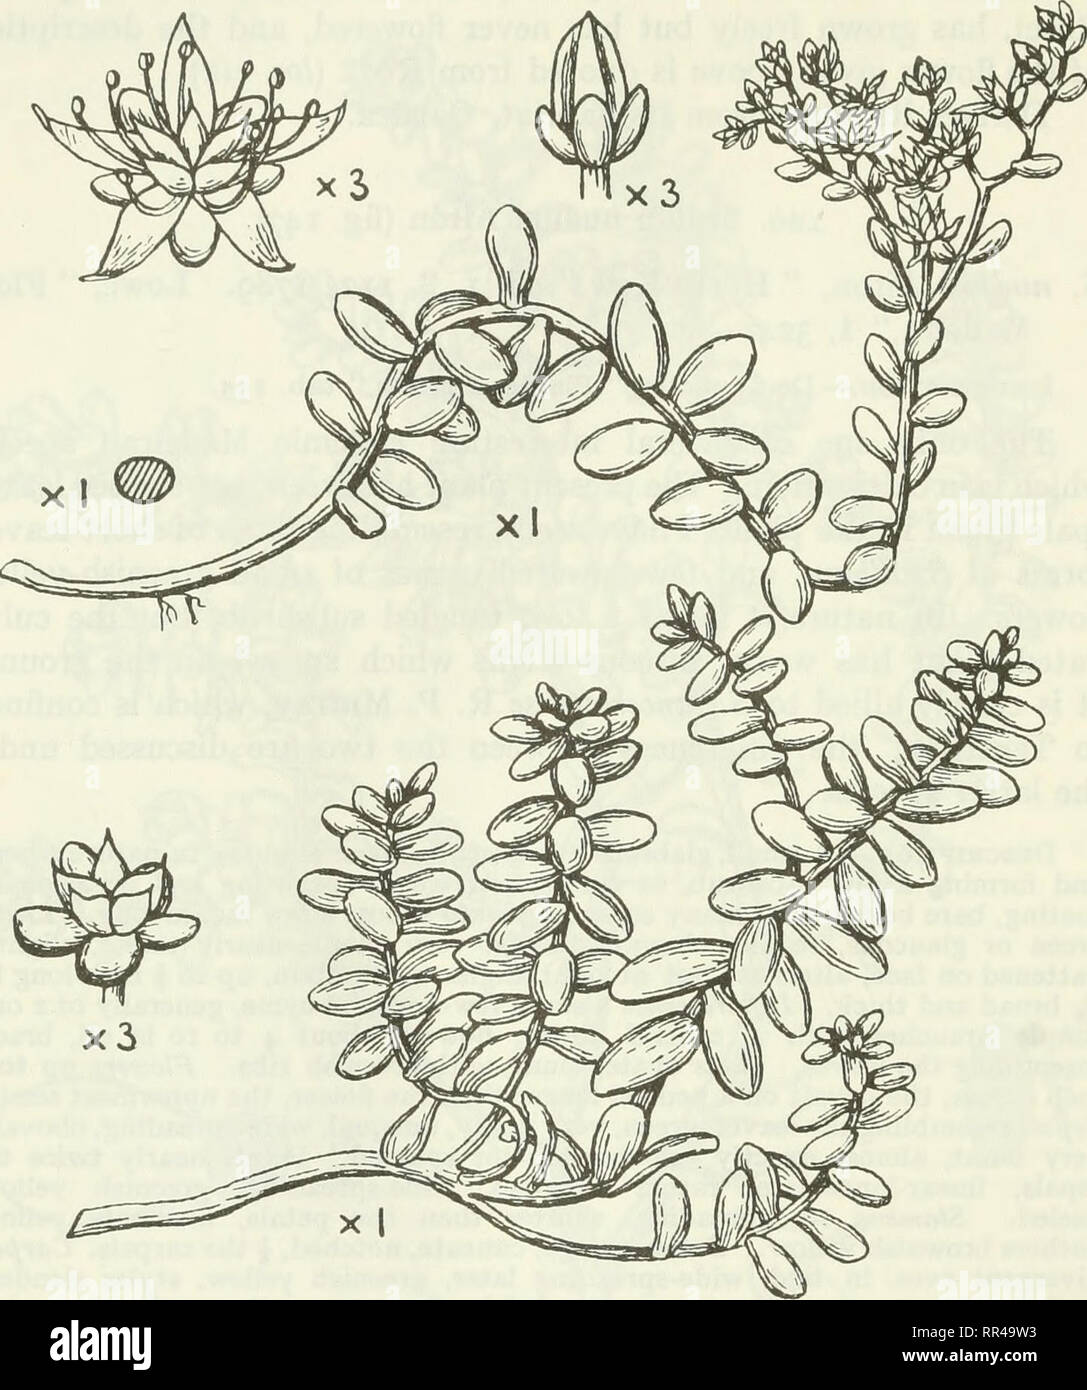 . An account of the genus Sedum as found in cultivation. Sedum; Crassulaceae. 252 JOURNAL OF THE ROYAL HORTICULTURAL SOCIETY. By the kindness of Dr. G. V. Perez, of Teneriffe, I received, in 1916, plants collected in Madeira the previous year by Sefior Menezes.. Fig. 147.—5. nudum Alton. They closely resemble the Kew plant, but the leaves were rather greener and more slender. 121. Sedum lancerottense R. P. Murray (fig. 148). S. lancerottense R. P. Murray in Journ. oj Bot., 37, 2or, 1899. This plant (the only Sedum in the Canaries, excepting the widely- spread annual 5. rubens) comes very close Stock Photo